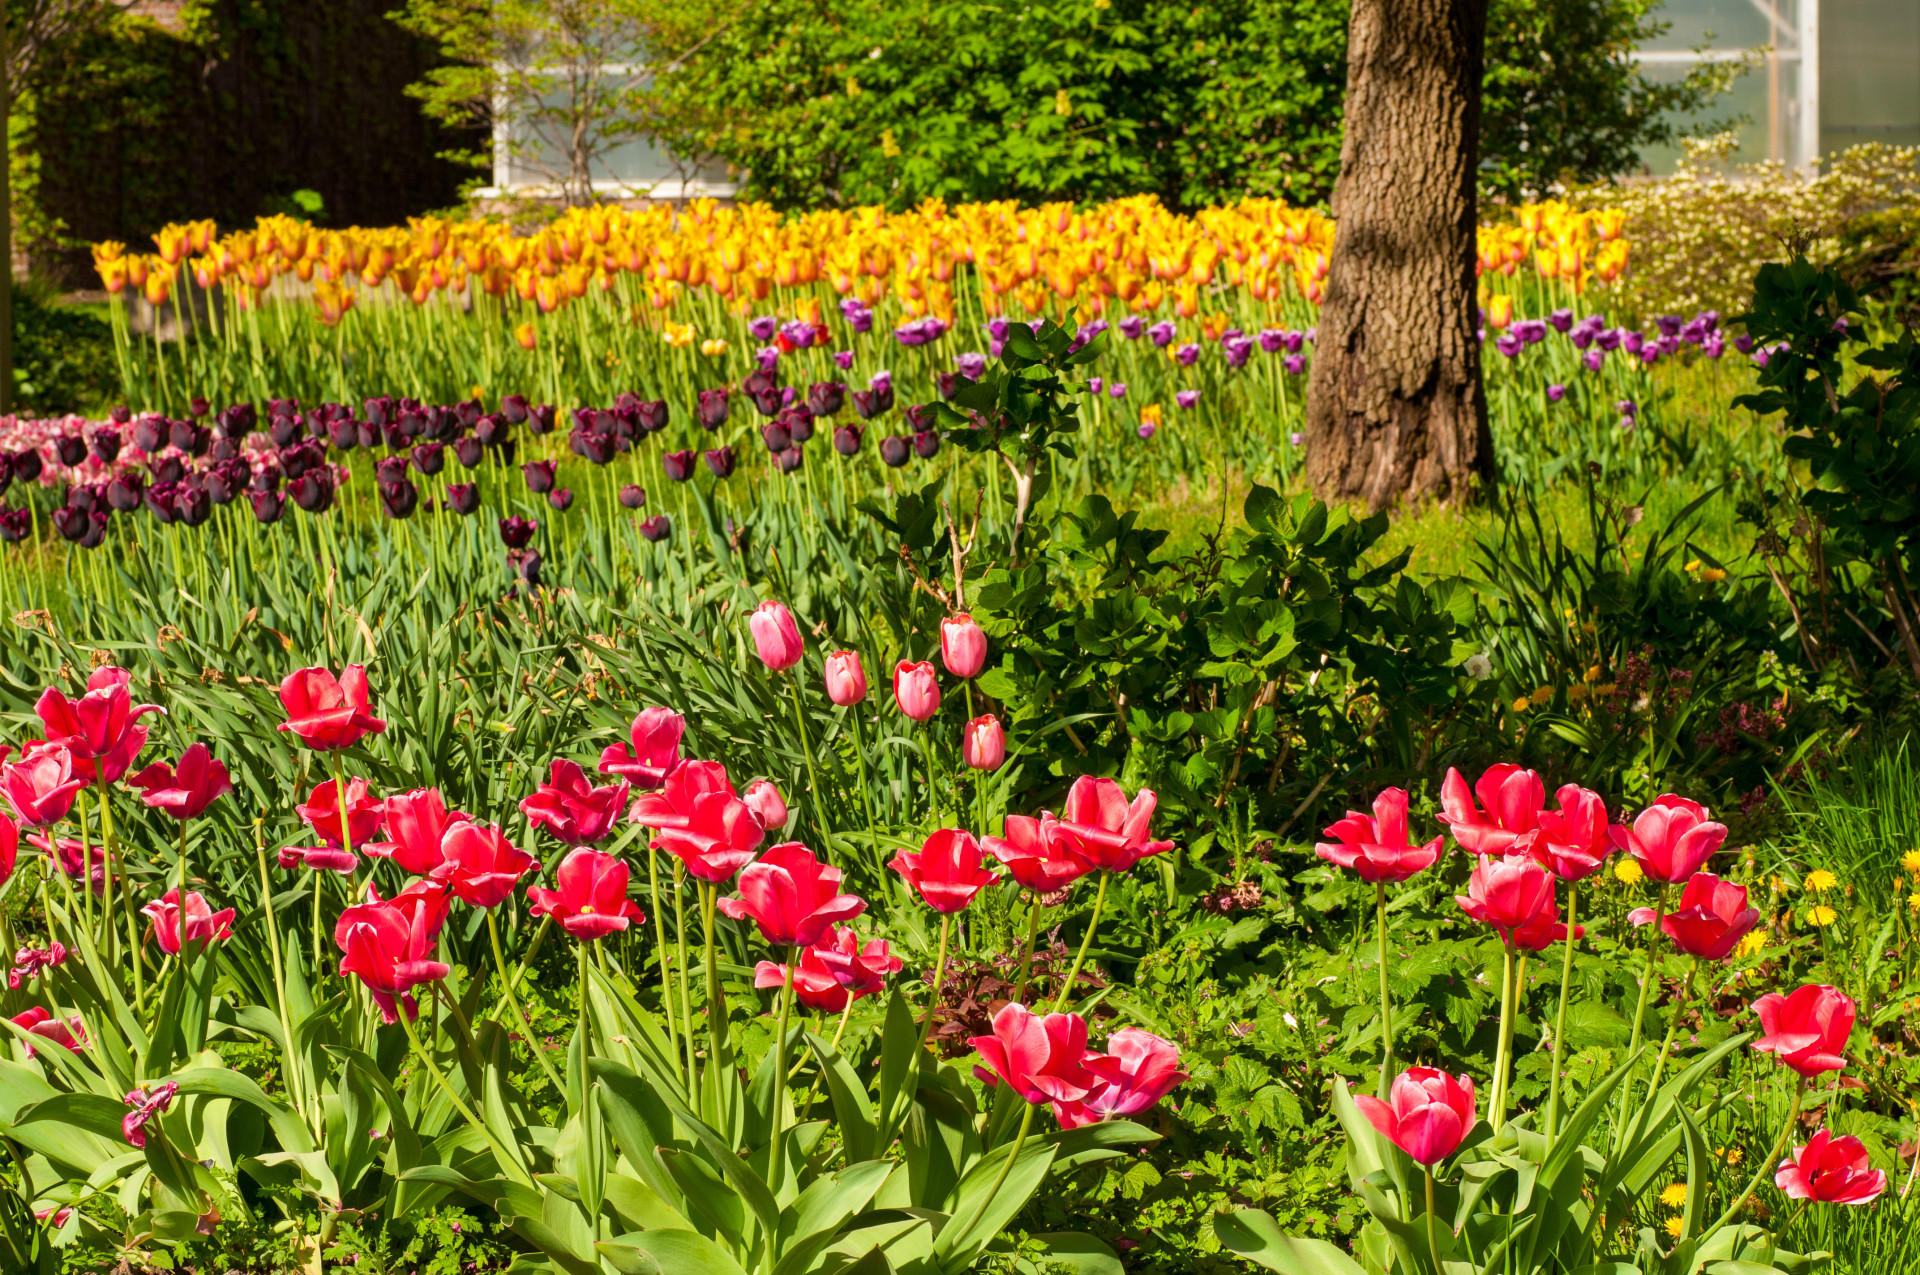 The park is home to 350 different types of plants, 50 animal species, and expansive fields of tulips that are truly to die for.<p>You may also like:<a href="https://www.starsinsider.com/n/473255?utm_source=msn.com&utm_medium=display&utm_campaign=referral_description&utm_content=247050v5en-us"> How often you should be washing these everyday items</a></p>